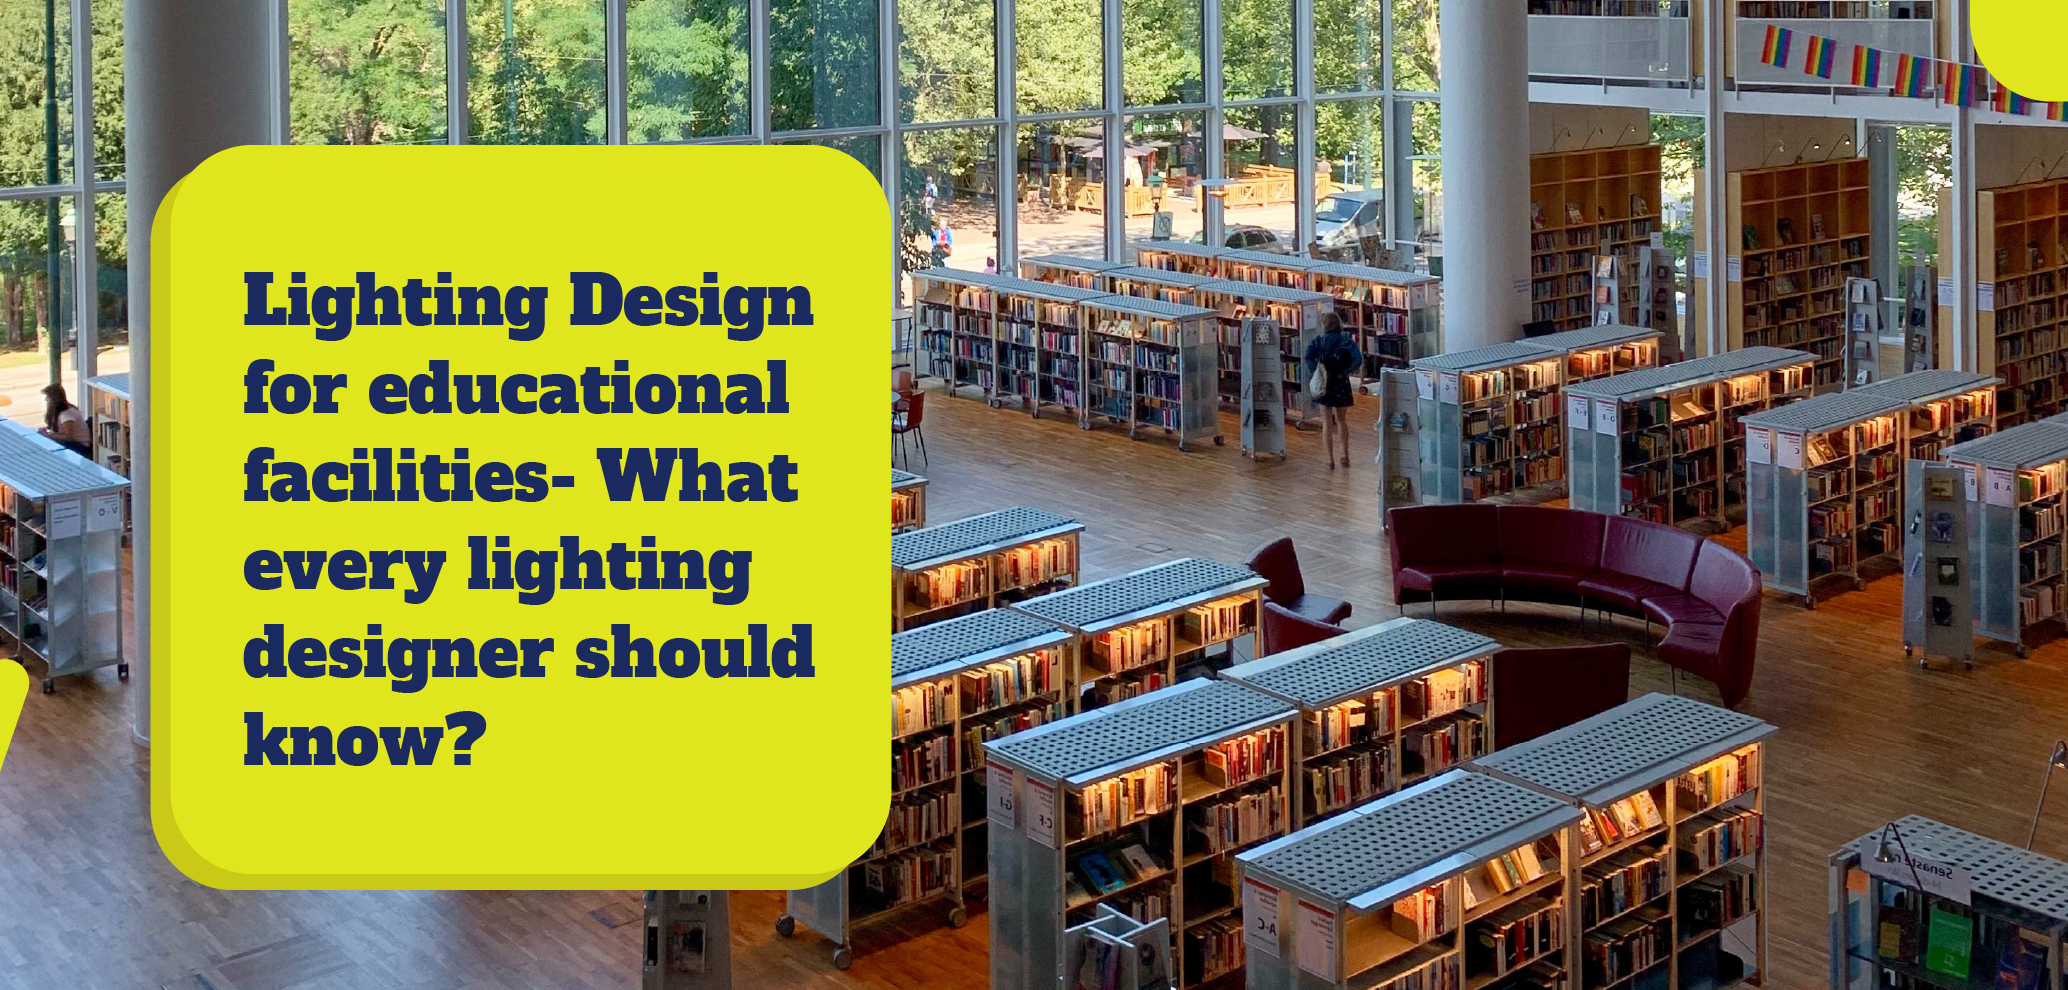 Lighting Design for educational facilities- What every lighting designer should know?